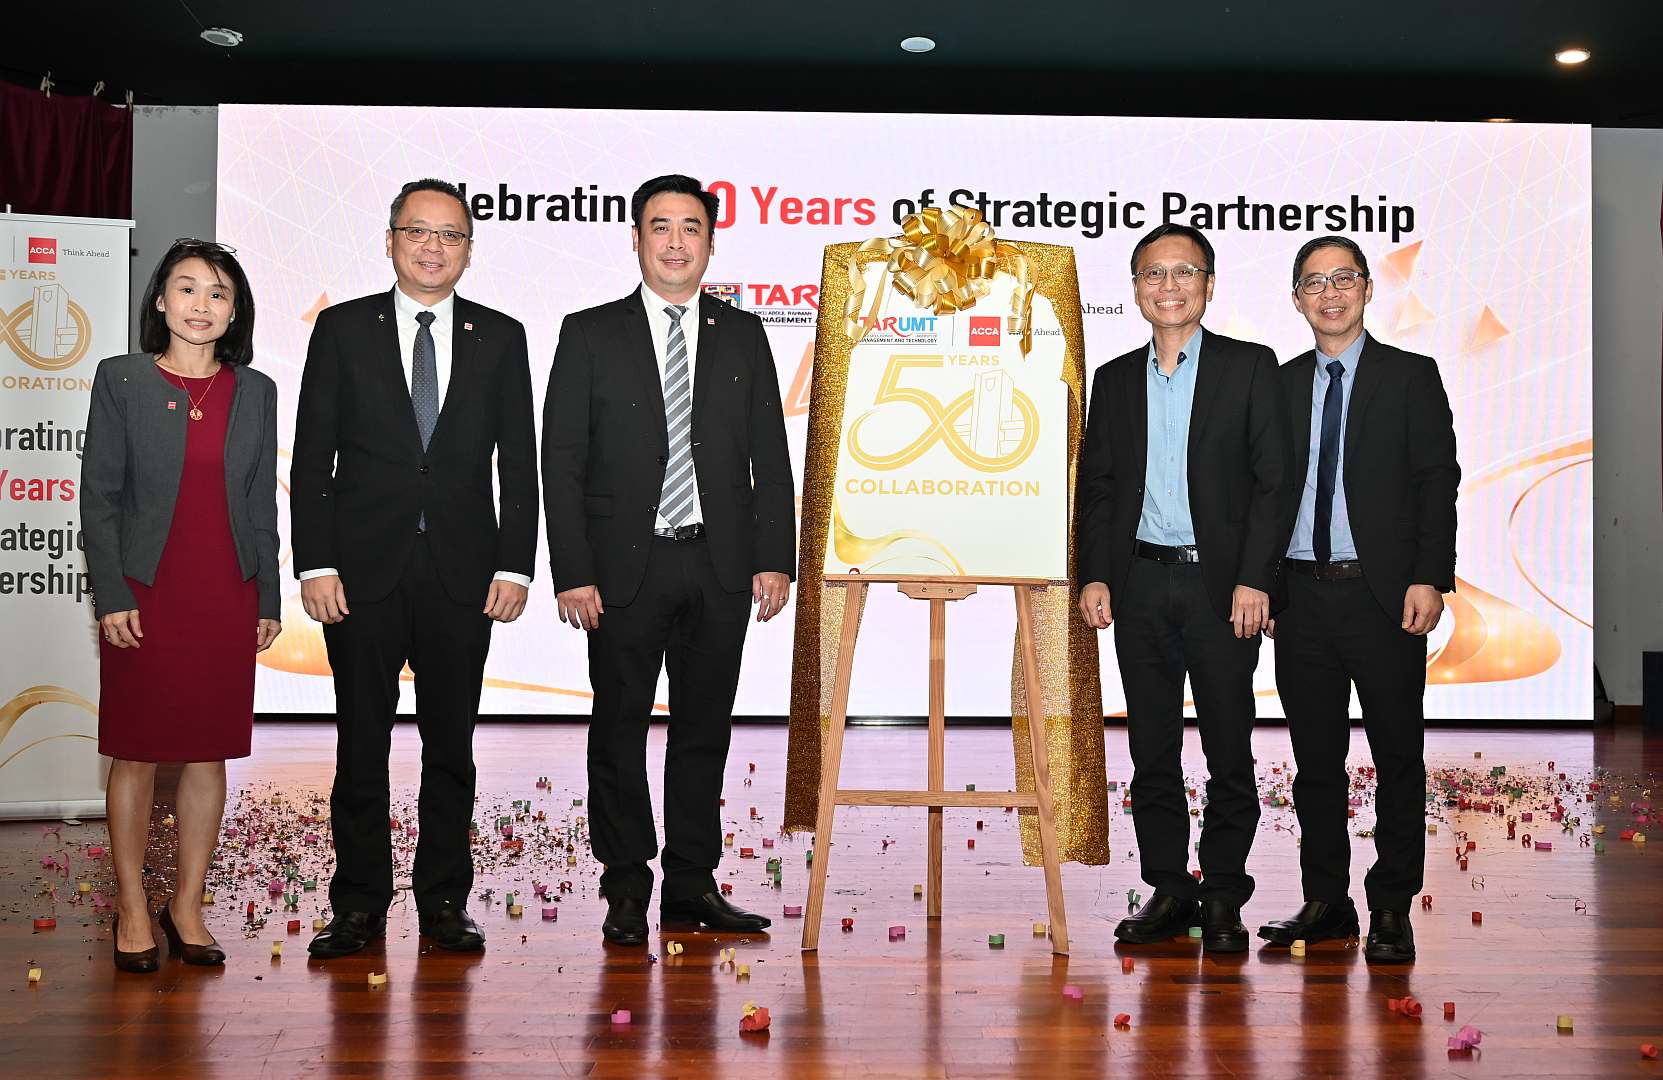 Prof Ir Dr Lee (second from right) and Mr Andrew (third from left) taking a group photograph while accompanied by (from left) Ms Lim Fen Nee, Immediate Past Chair, ACCA Malaysia Advisory Committee, Dato’ Lock Peng Kuan, Managing Partner, Audit &amp; Assurance, ACCA, and (rightmost) Mr Wee Chu Kok, Dean of Faculty of Accountancy, Finance and Business (FAFB), TAR UMT after unveiling the TAR UMT – ACCA 50 th Anniversary logo.